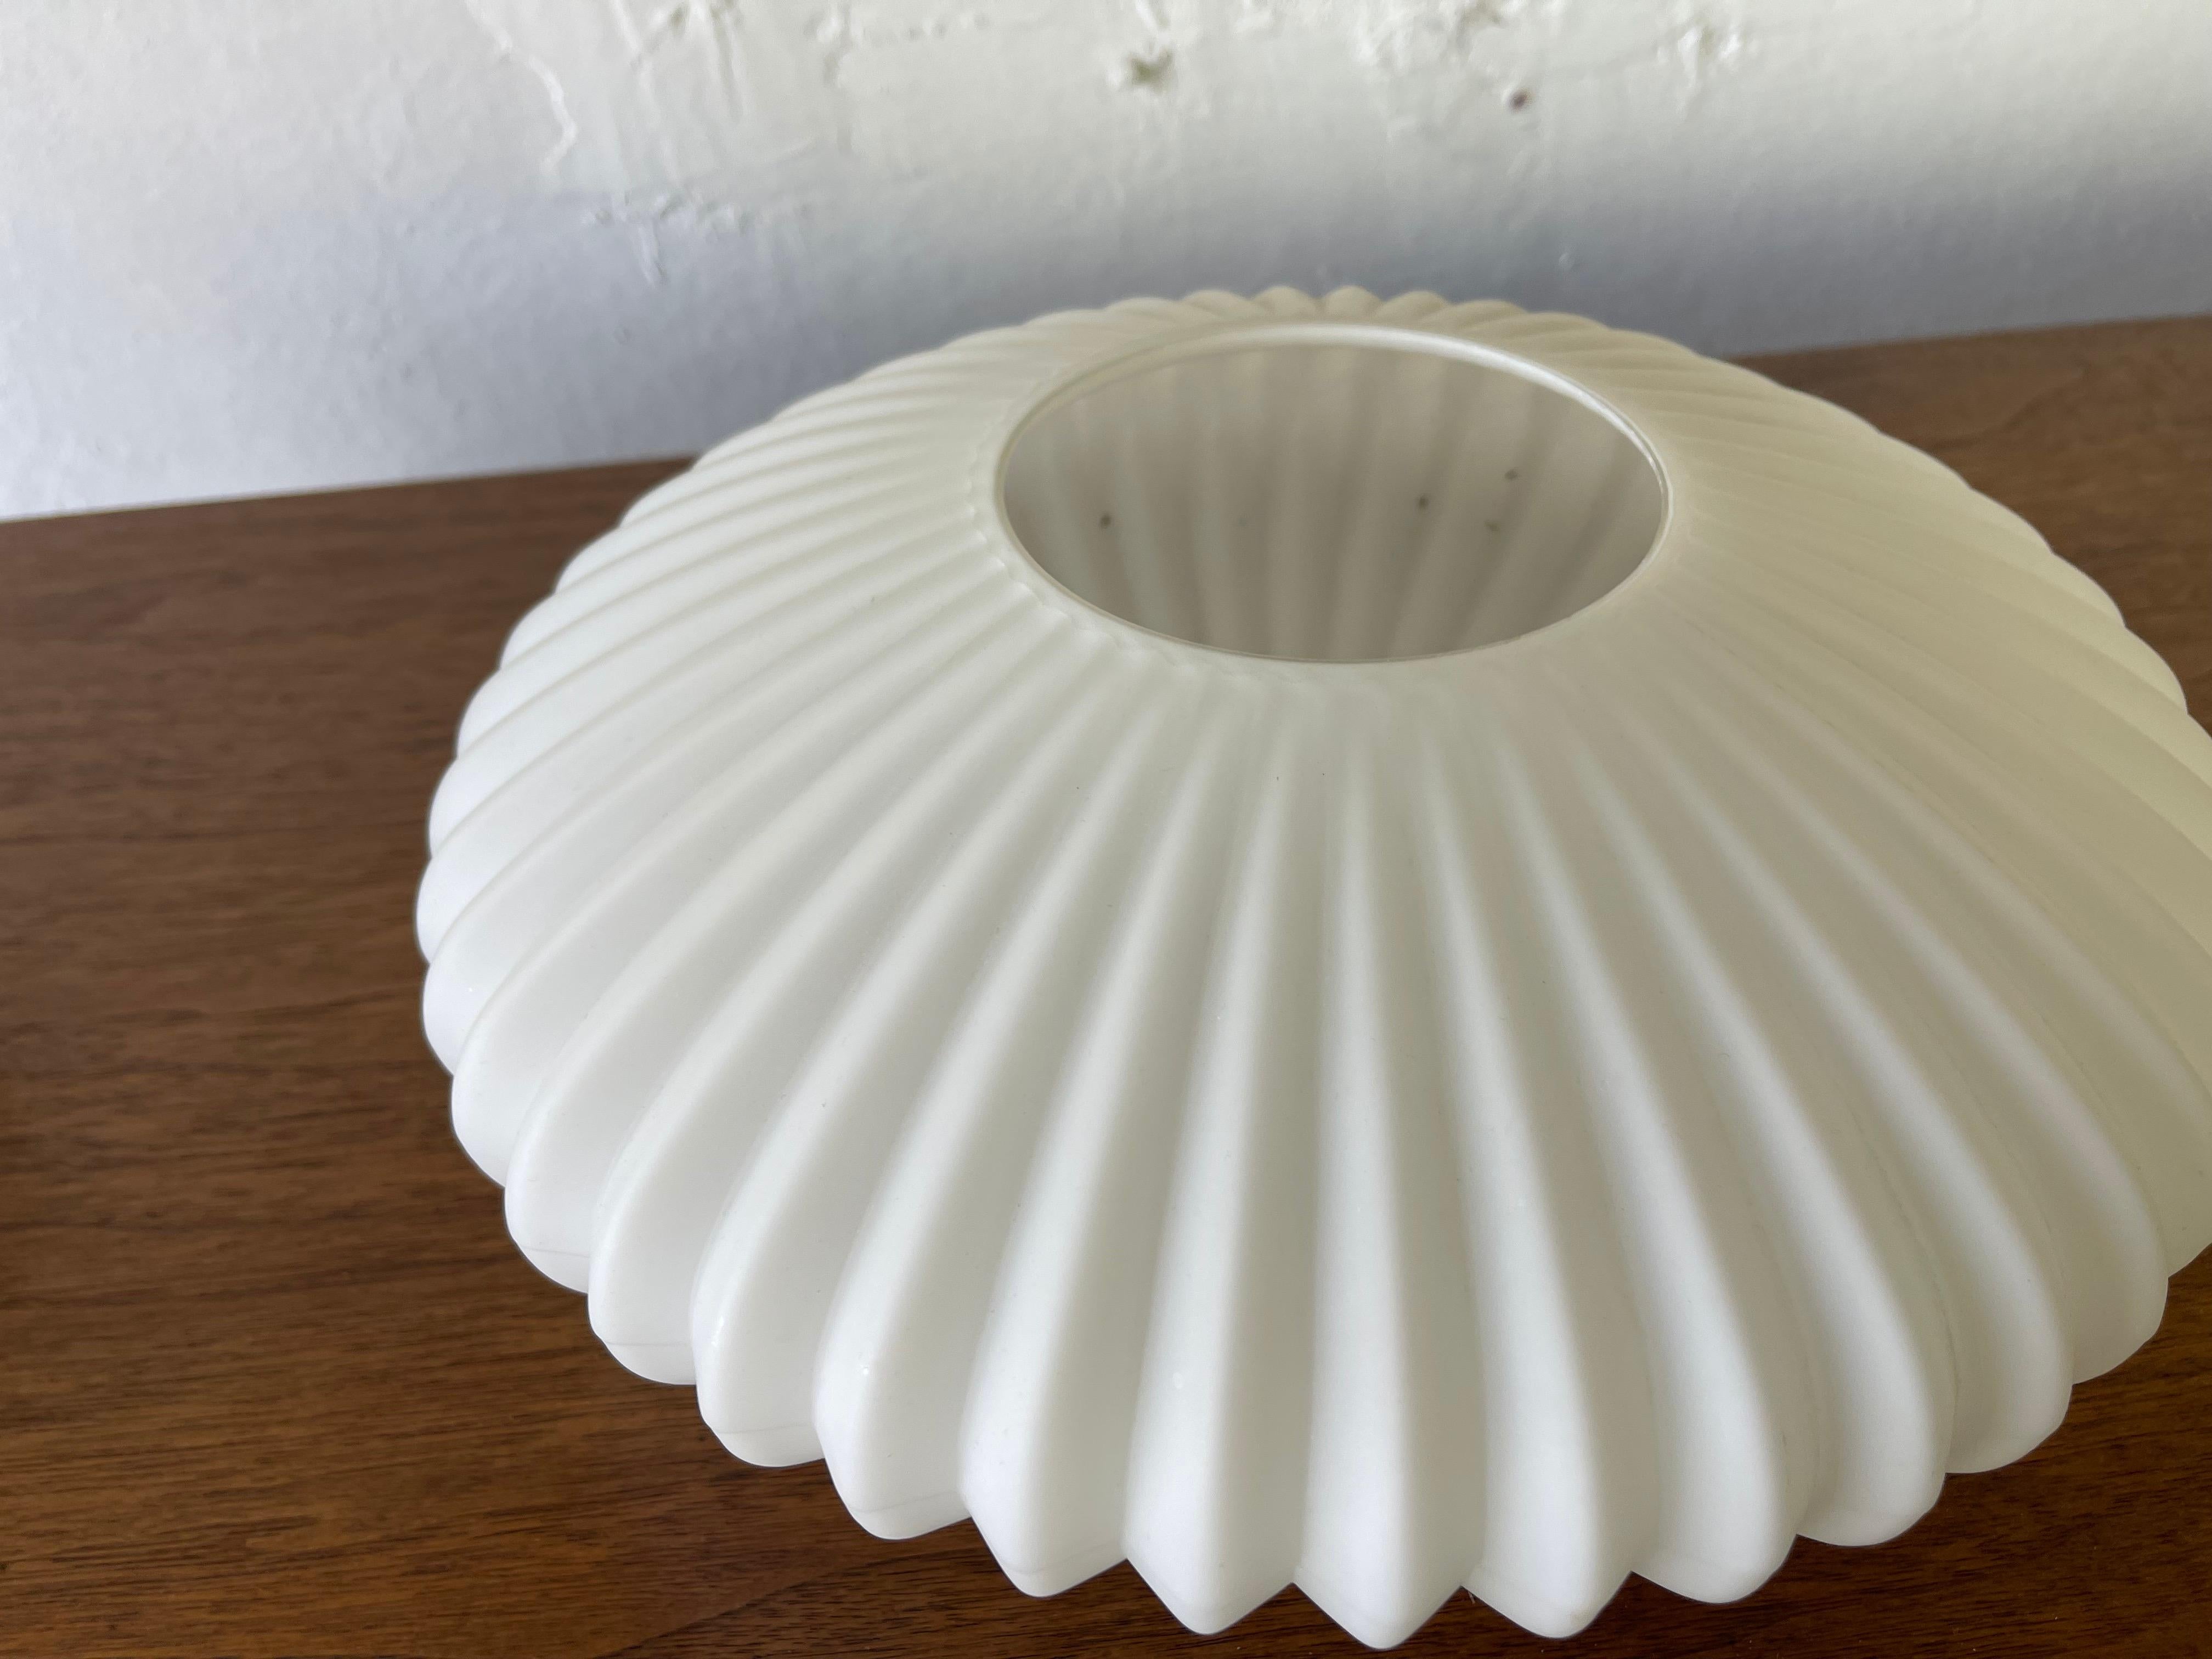 Brass Mid Century Whimsical & Sculptural Saucer Lamp Eames Style Milk Glass Shade